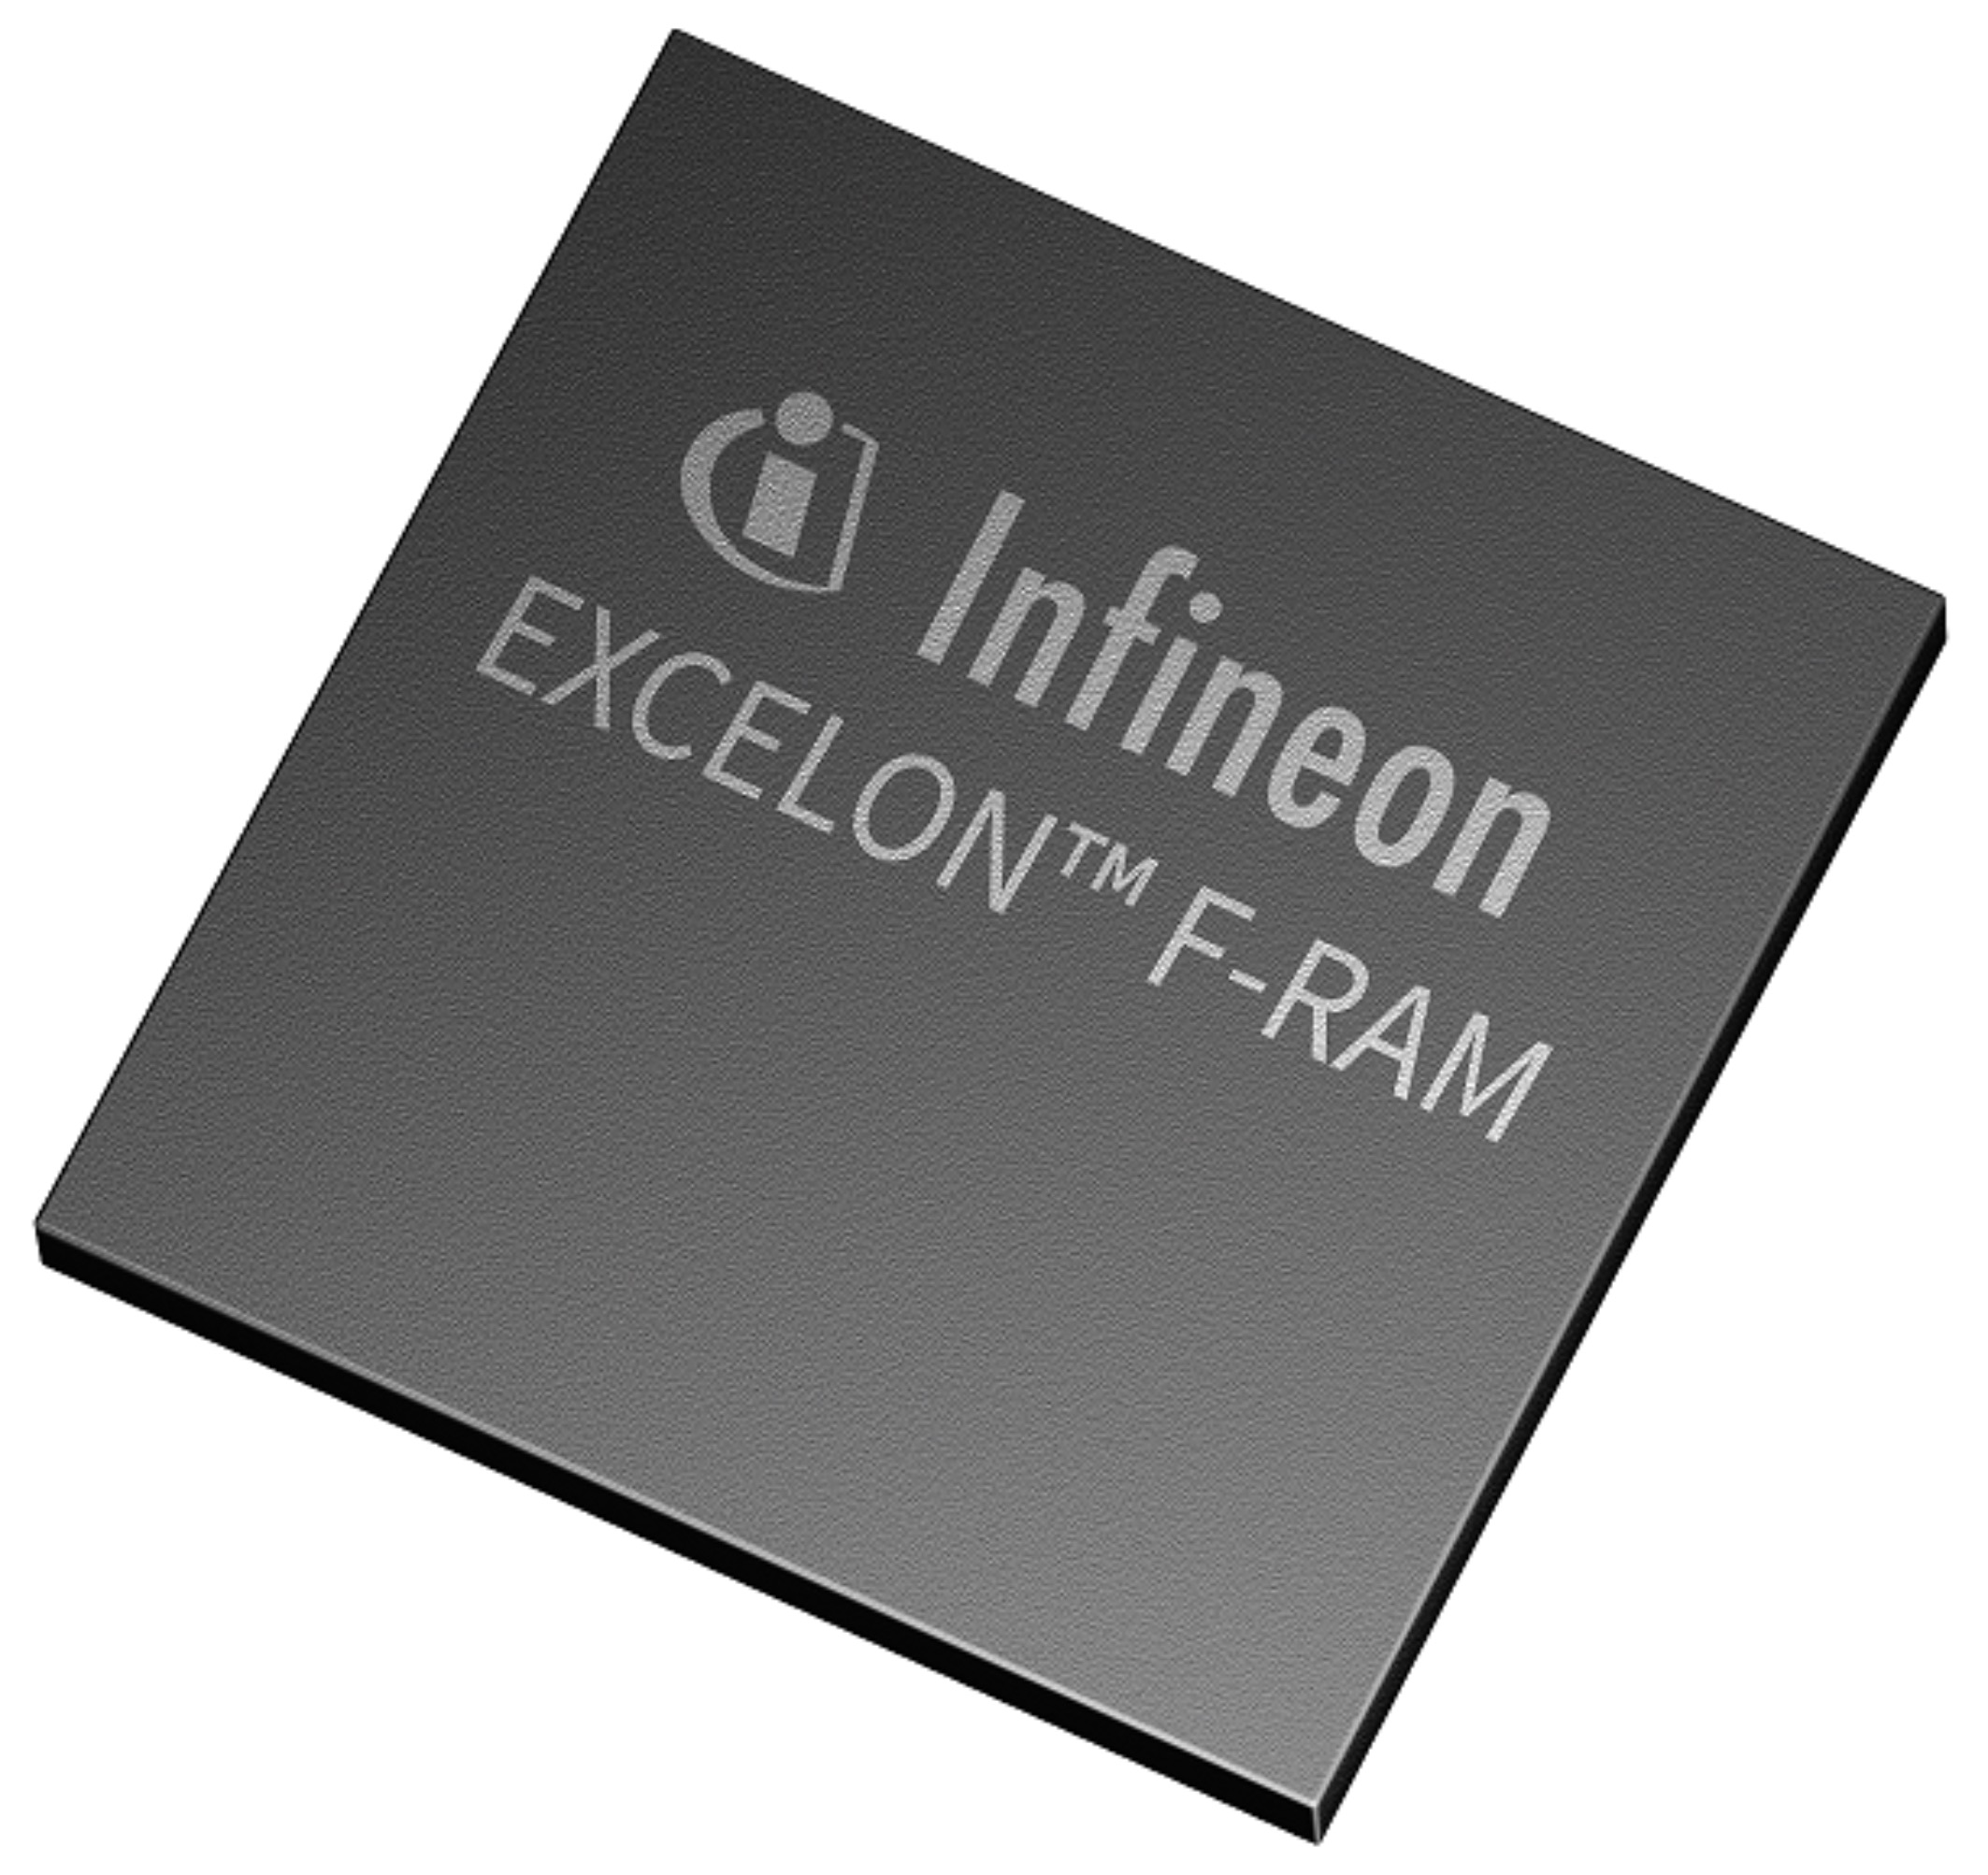 Infineon Introduces Industry's First 1Mbit Automotive-Qualified Serial EXCELON F-RAM and Adds 4Mbit Density